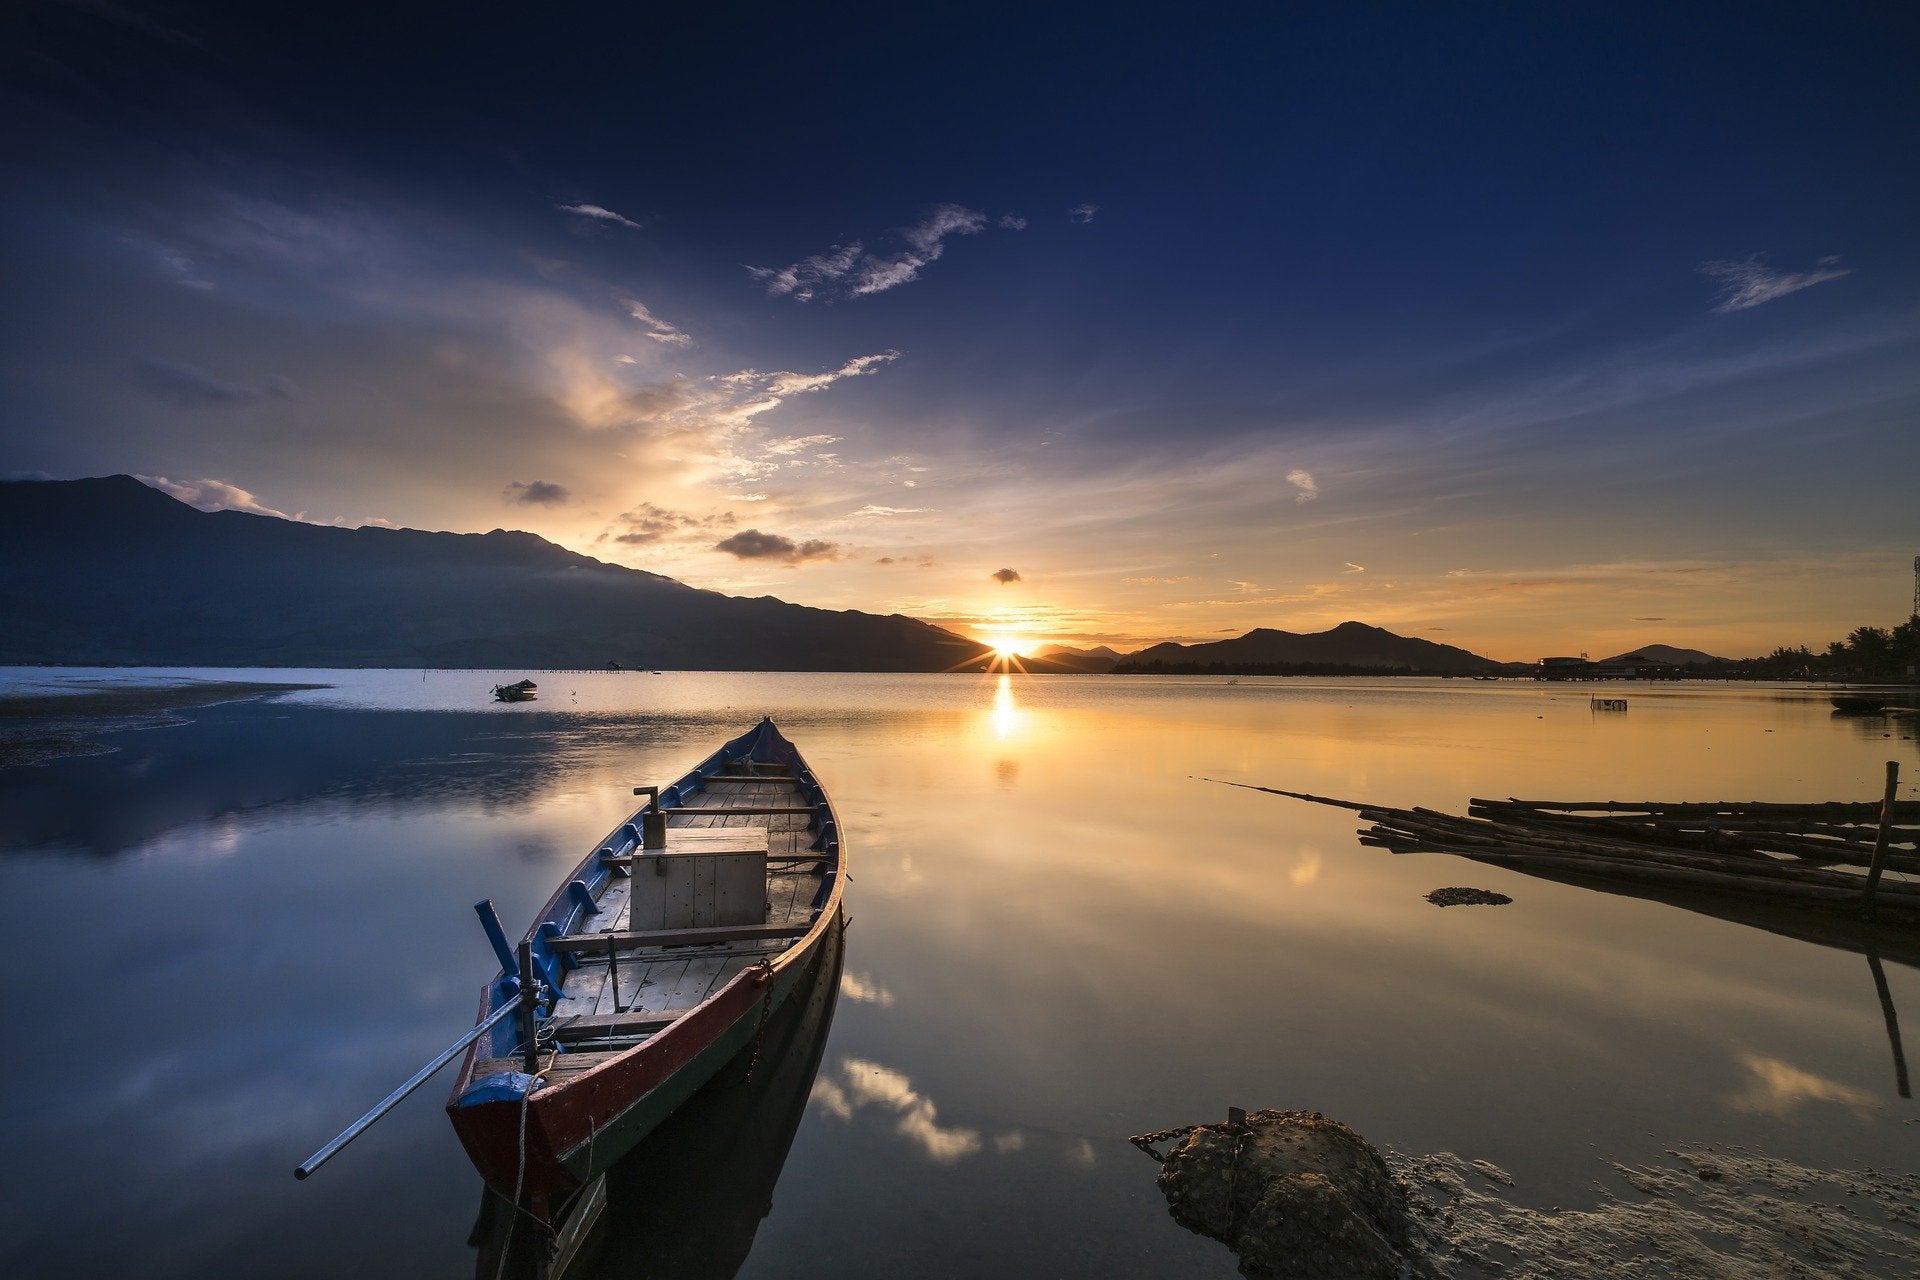 Row boat on water with sun rising